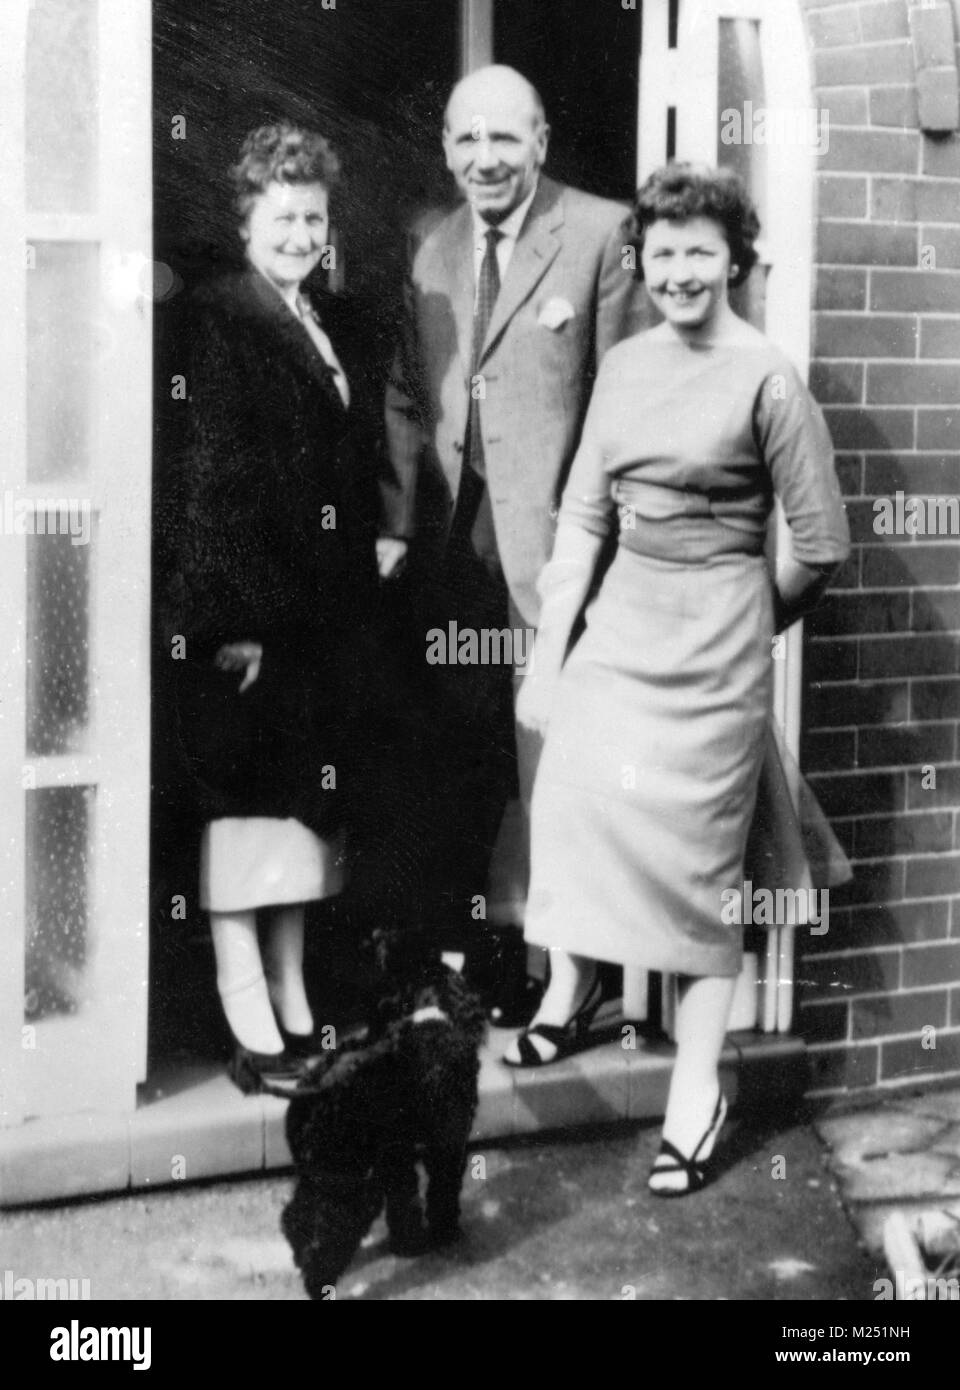 File photo dated 18-04-1958 of Manchester United manager Matt Busby at his home in the city, after returning from Munich. He has been recovering from injuries sustained in the Munich air disaster that claimed the lives of eight of his team. With him are his wife Jean and daughter Sheena. Stock Photo